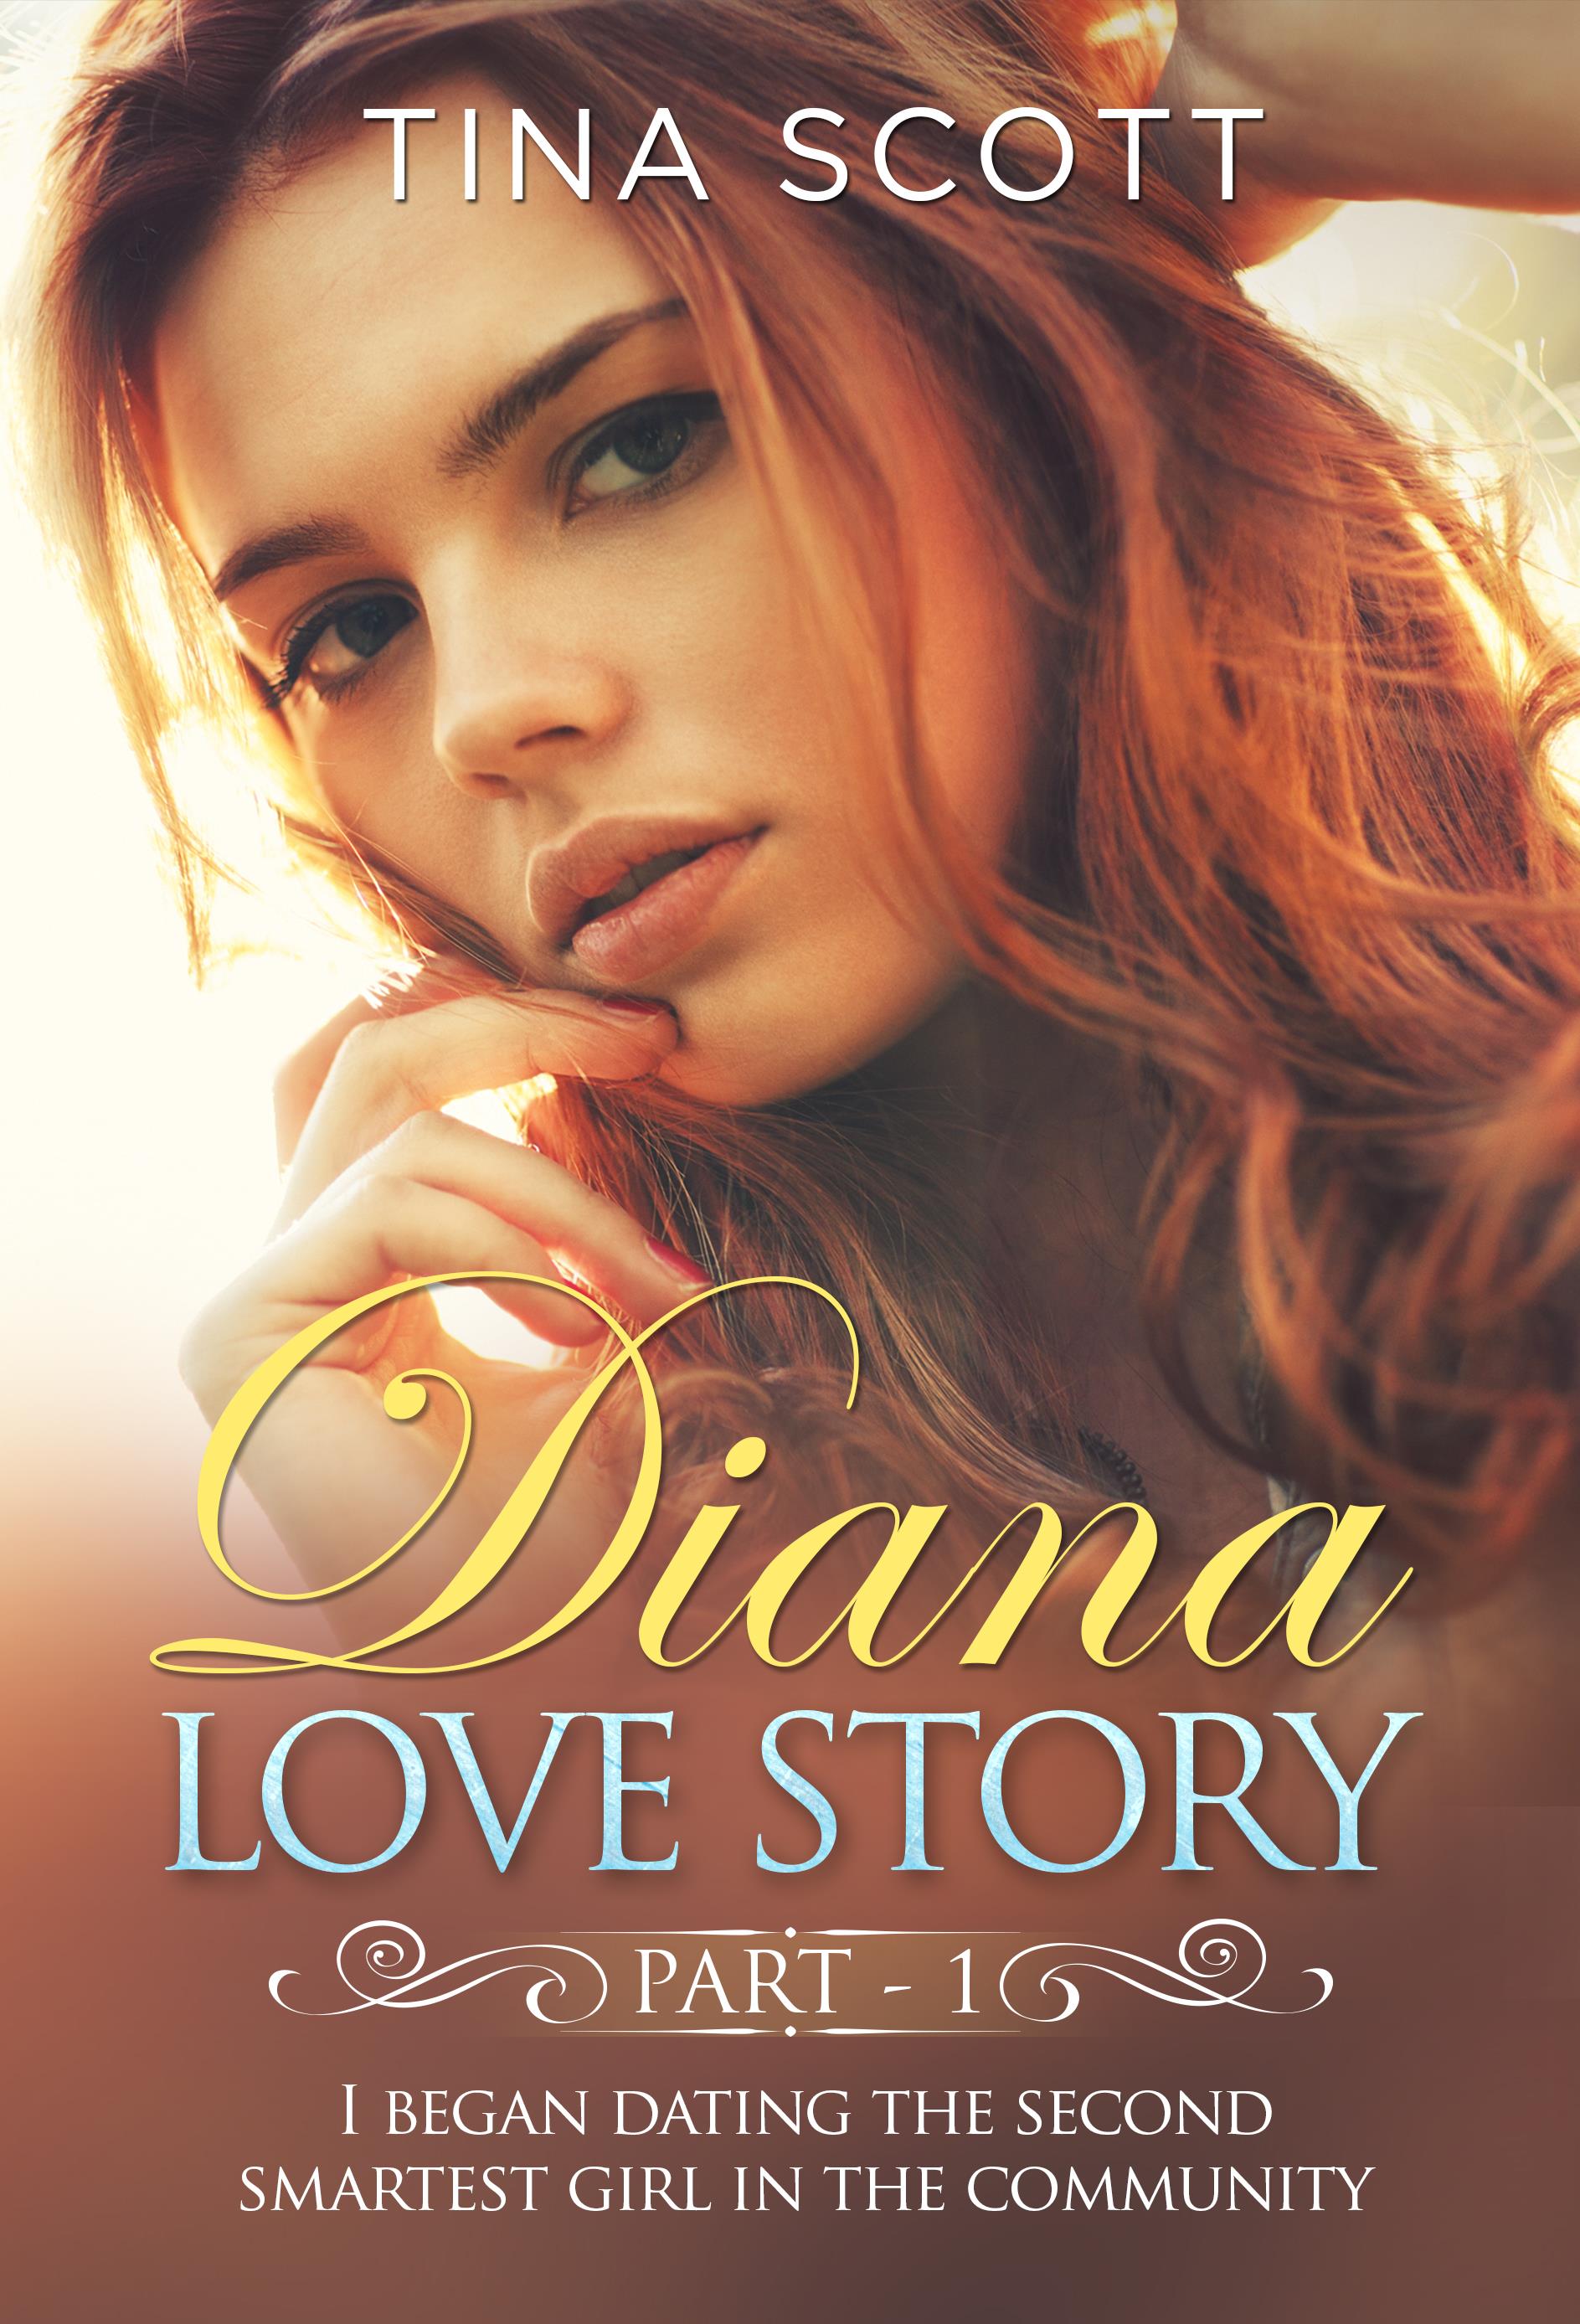 Diana Love Story (PT. 1). I began dating the second smartest girl in the community.